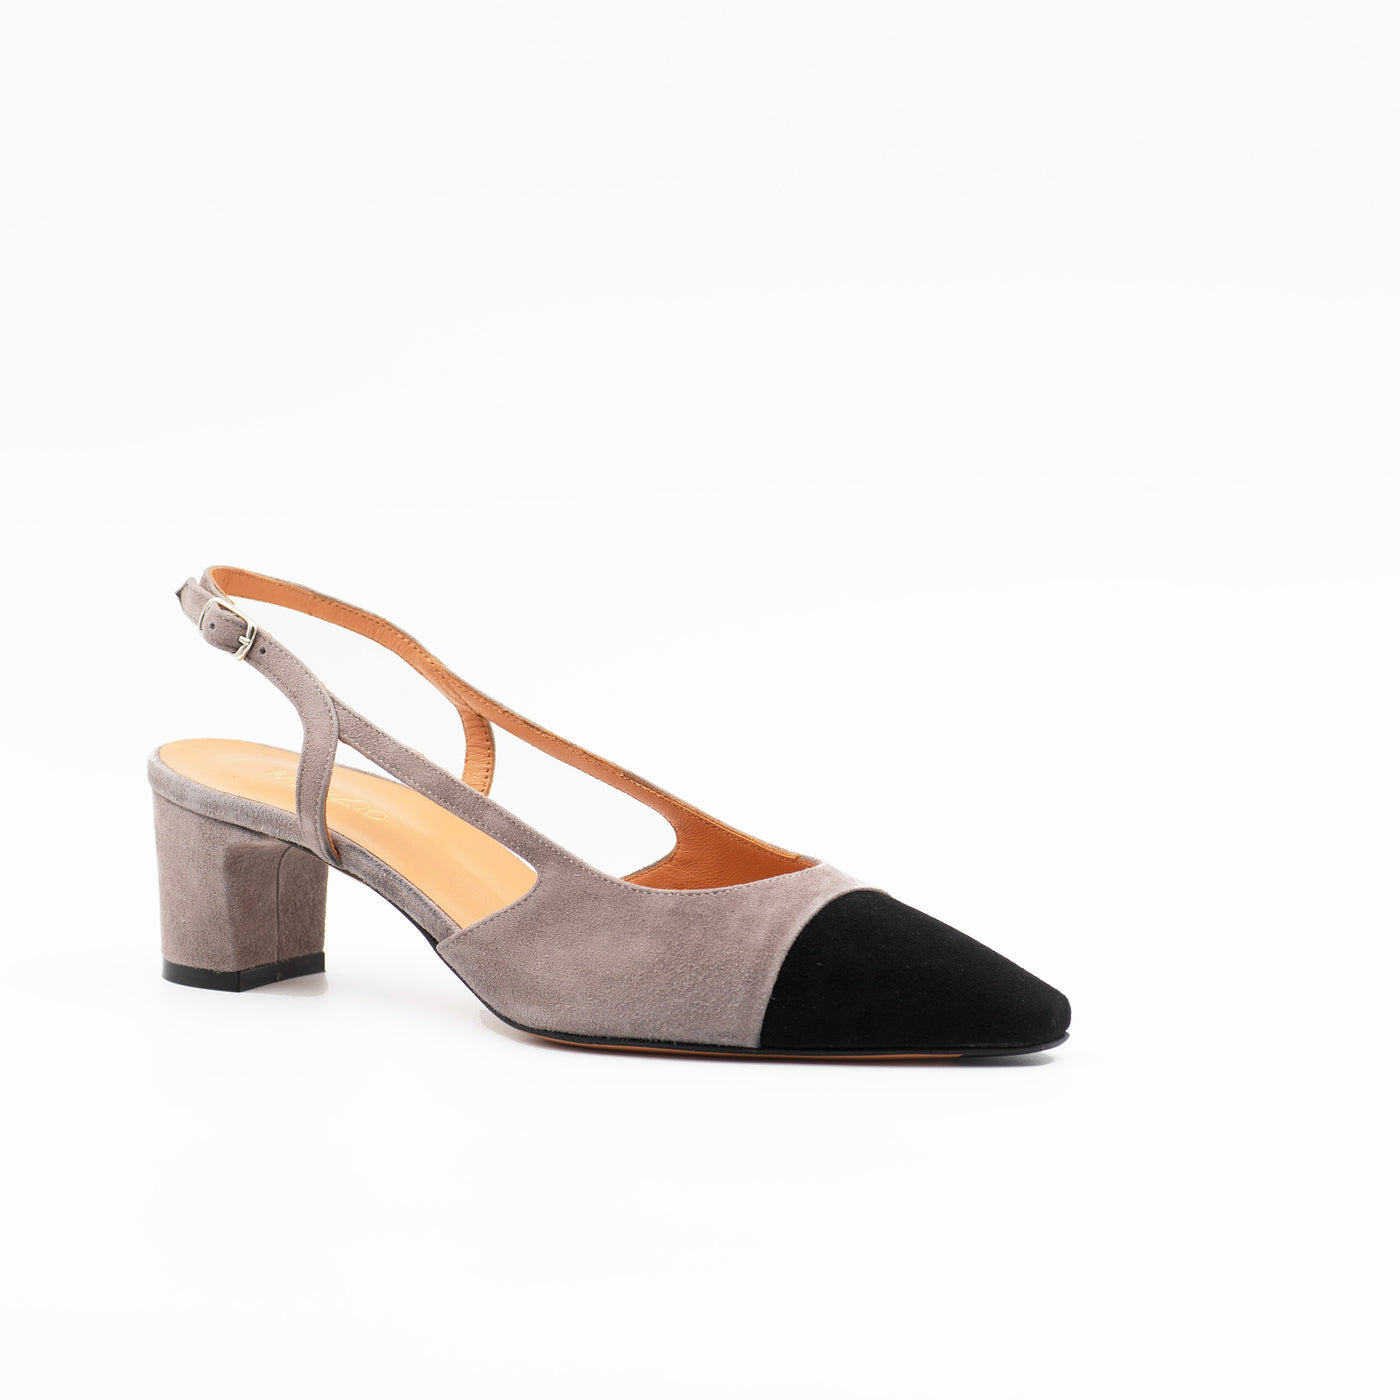 Two-Tone Slingback in Grey Suede